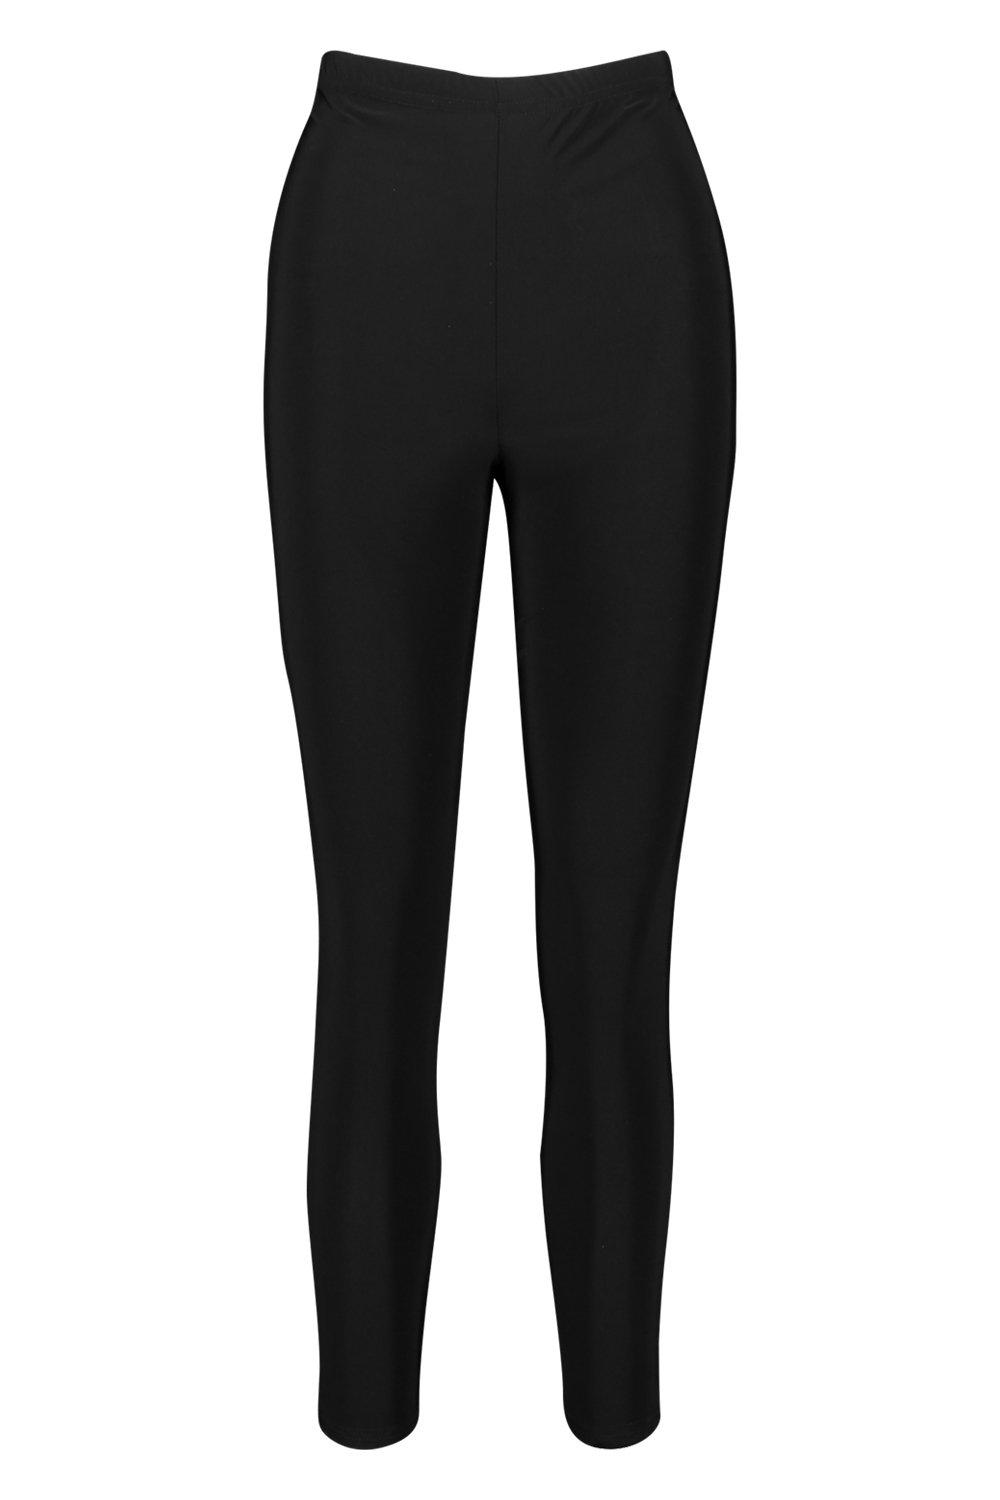 Women's Ruched Bum Booty Boosting Gym Leggings